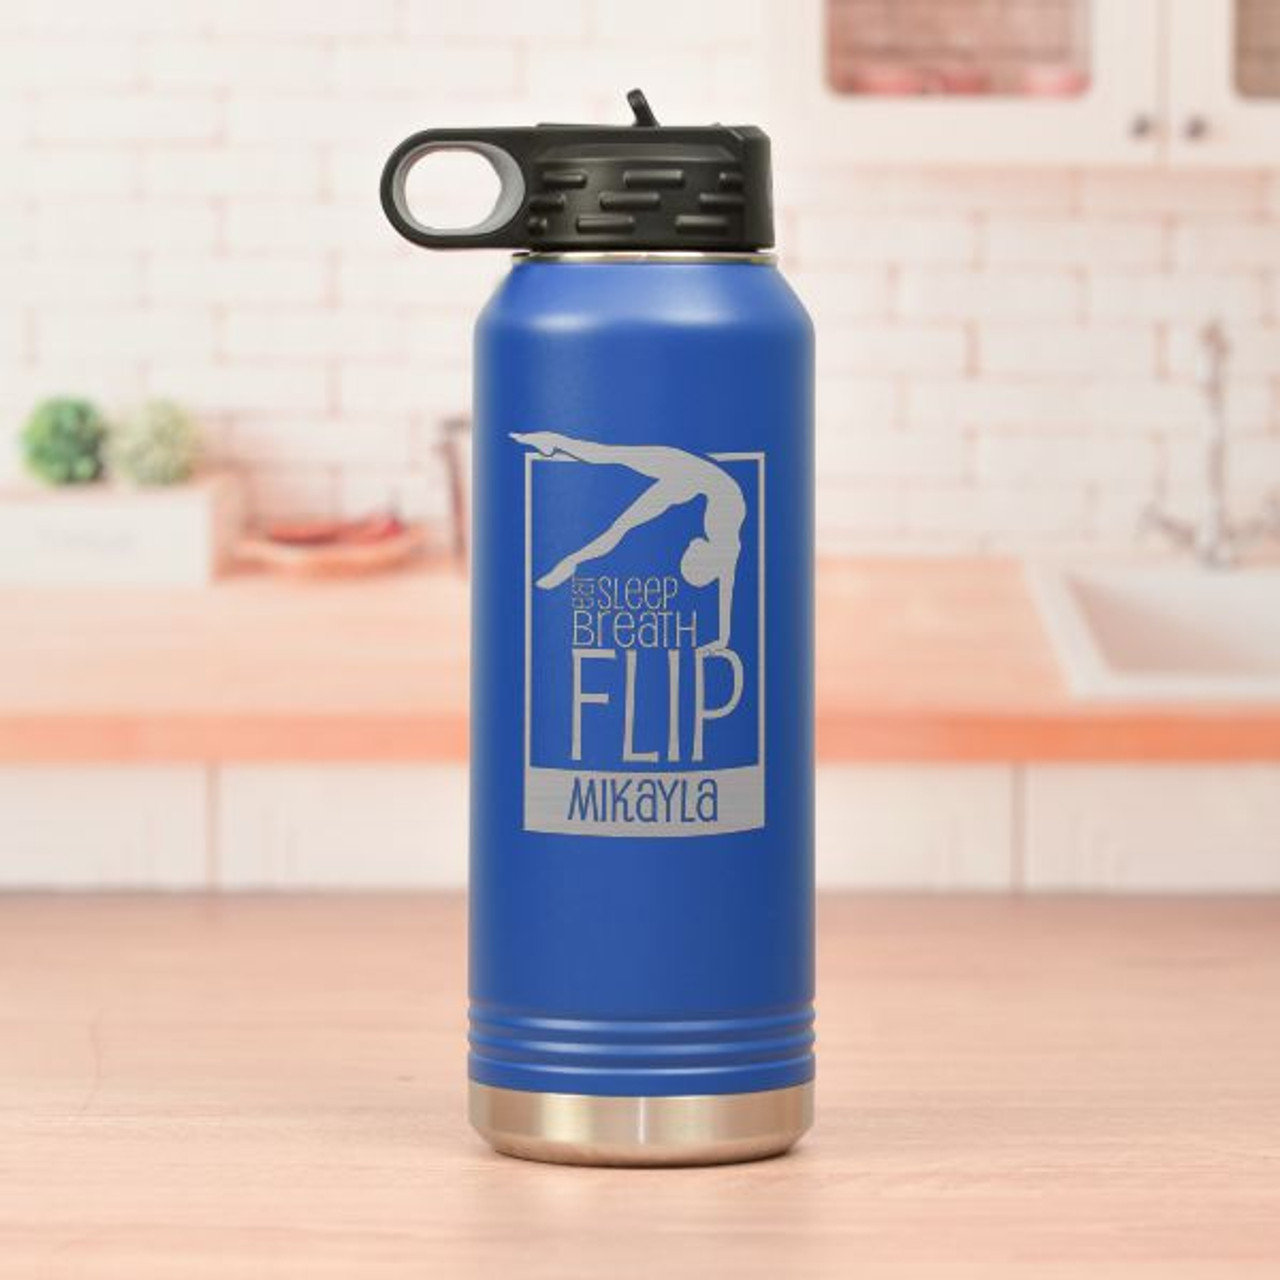 https://cdn11.bigcommerce.com/s-mdwz5t7wme/images/stencil/1280x1280/products/2080/6321/DW5076-Gymnast-waterbottle__29403.1701711860.jpg?c=2?imbypass=on